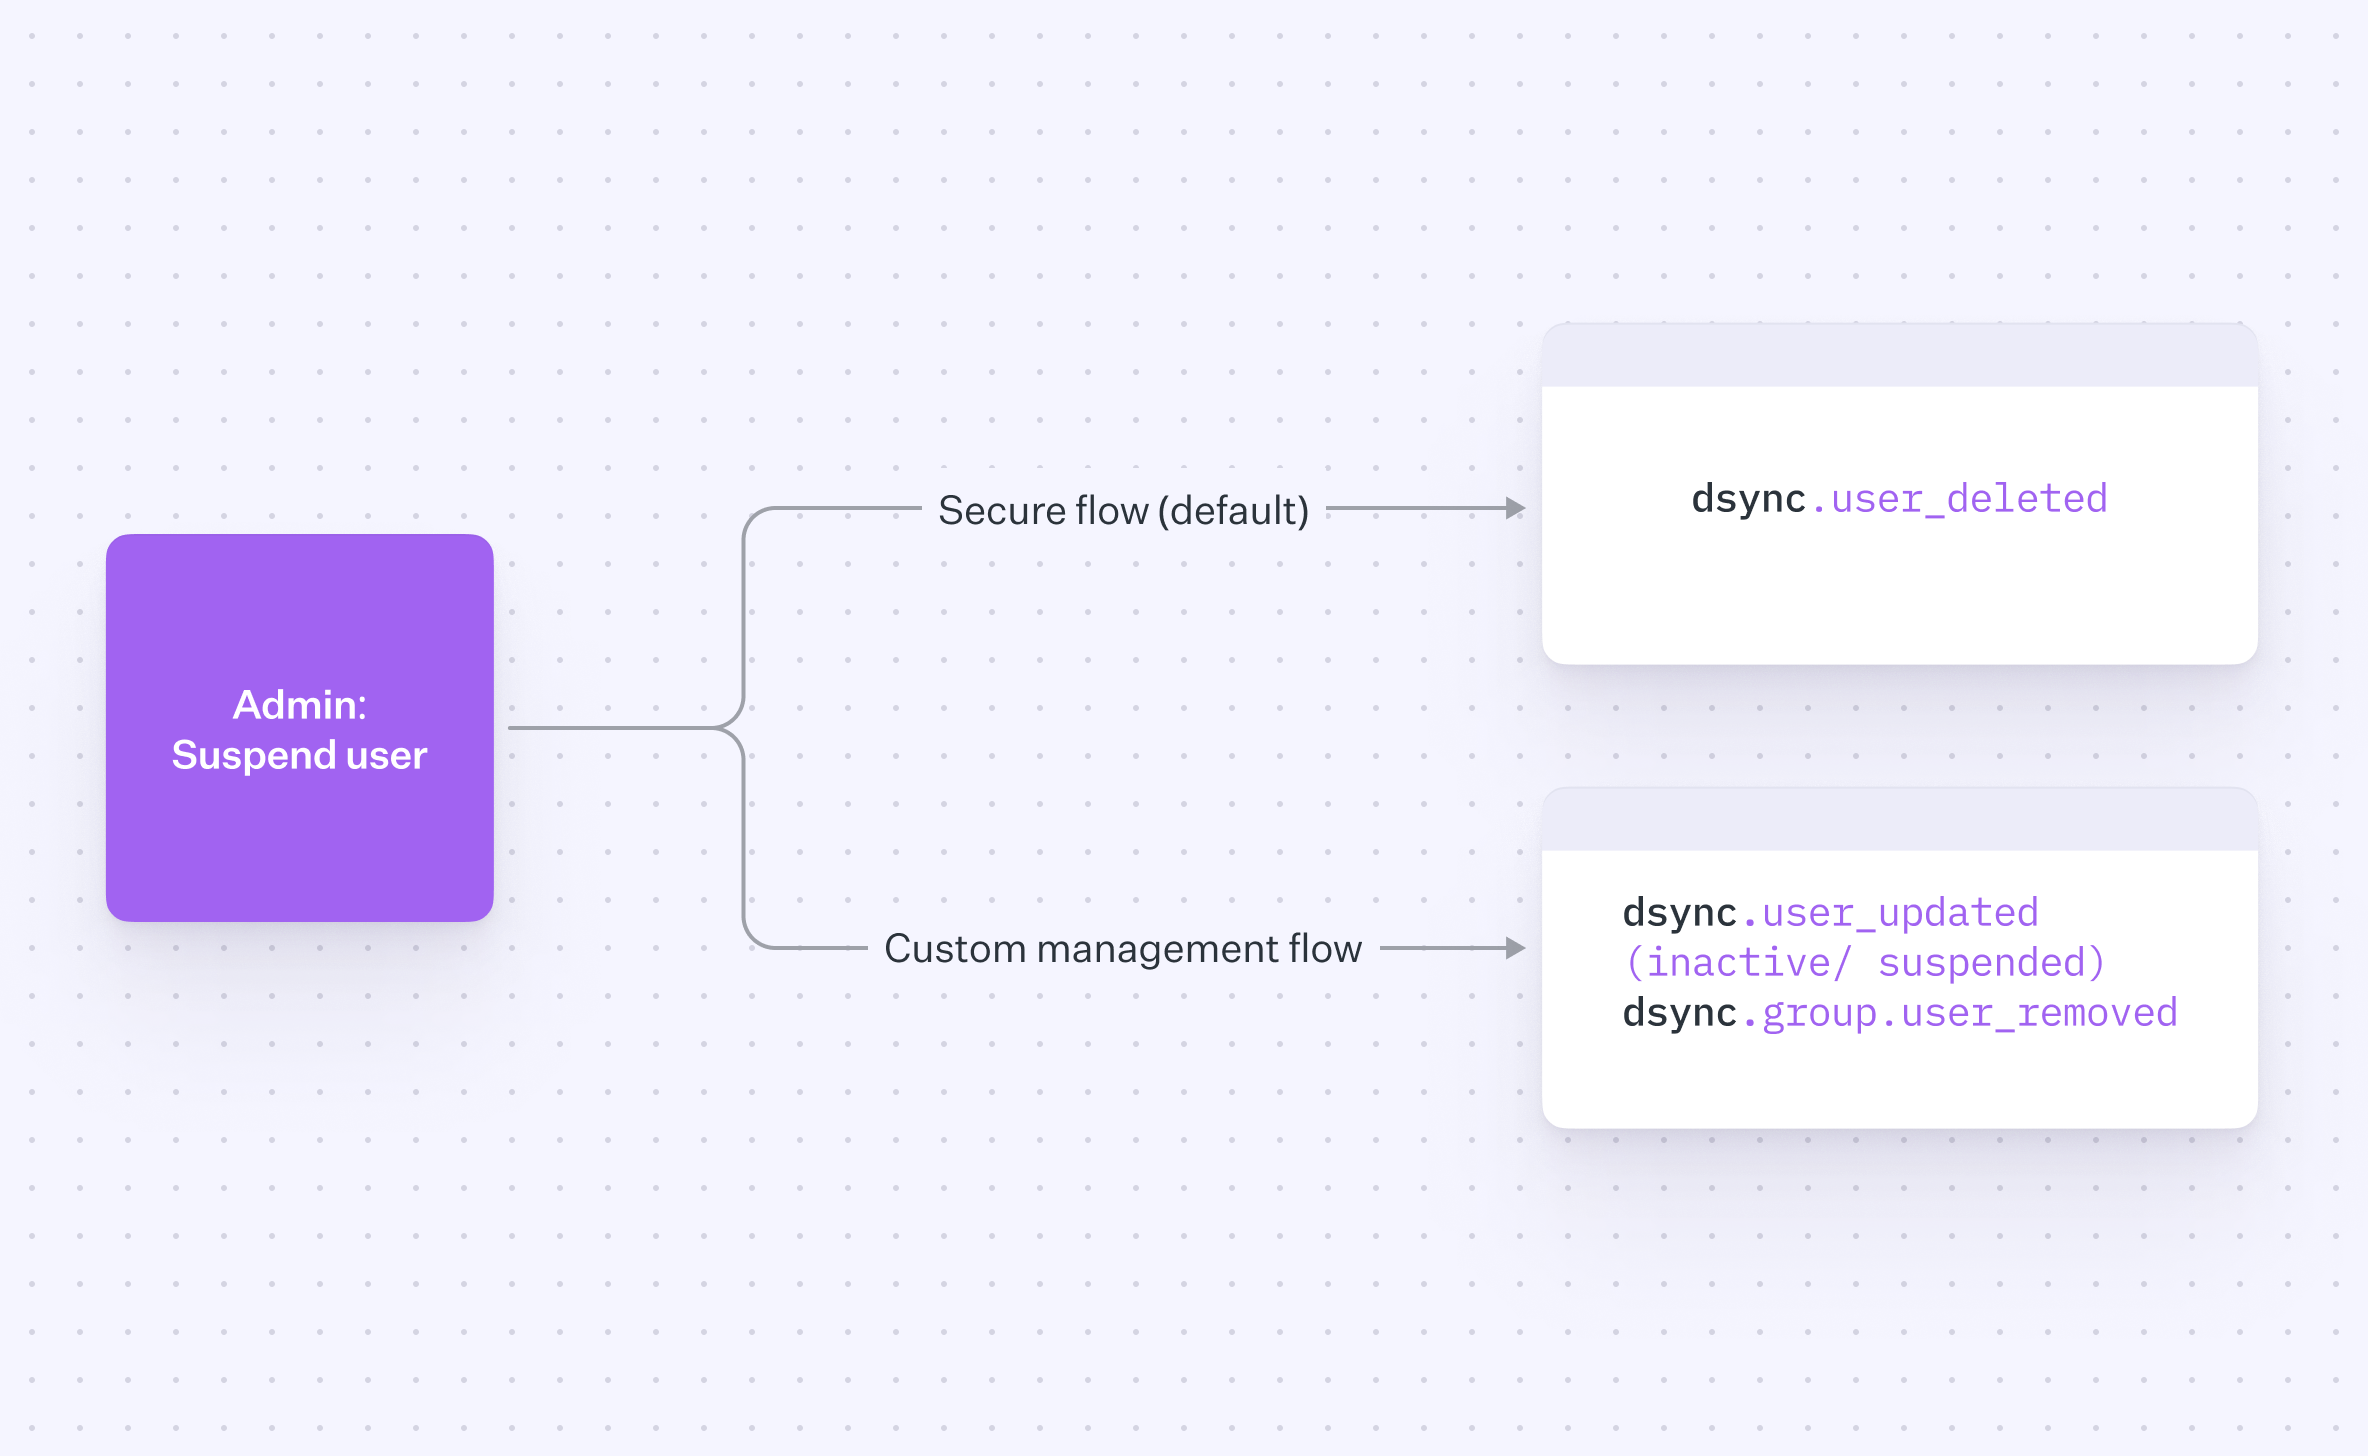 A breakdown of the different events for each configuration path on handling inactive users.